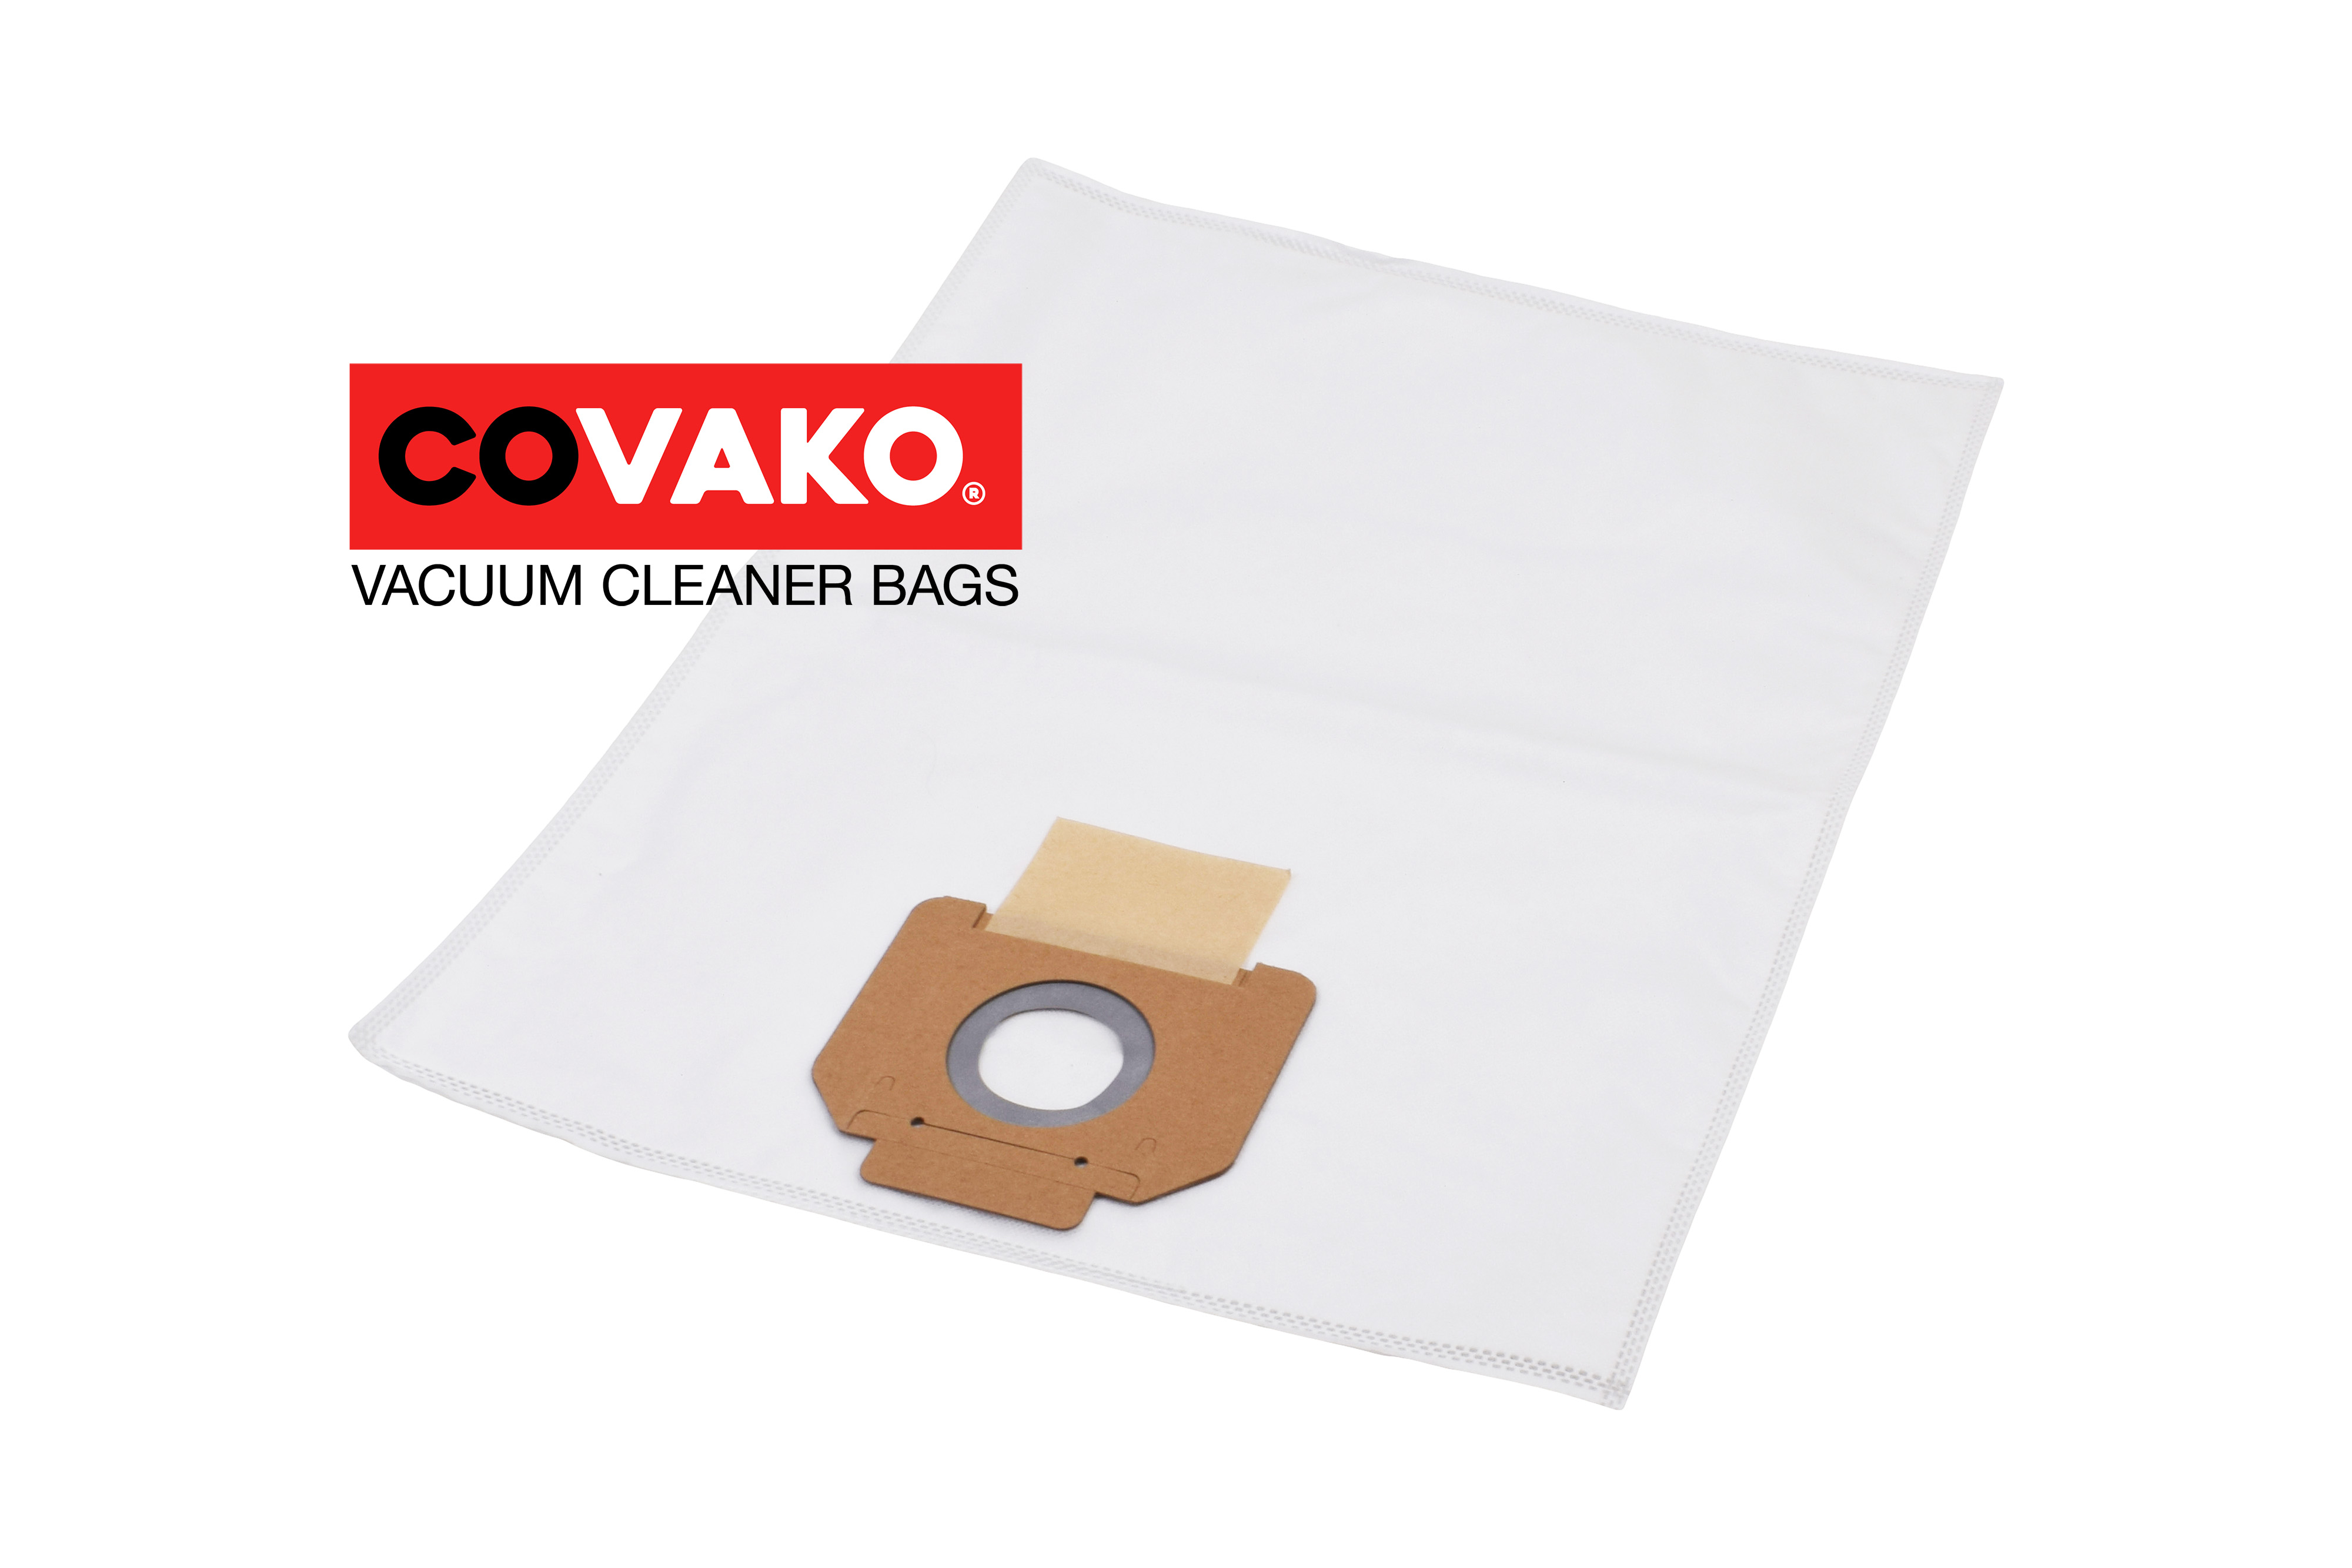 Kärcher NT 361 Eco H / Synthesis - Kärcher vacuum cleaner bags